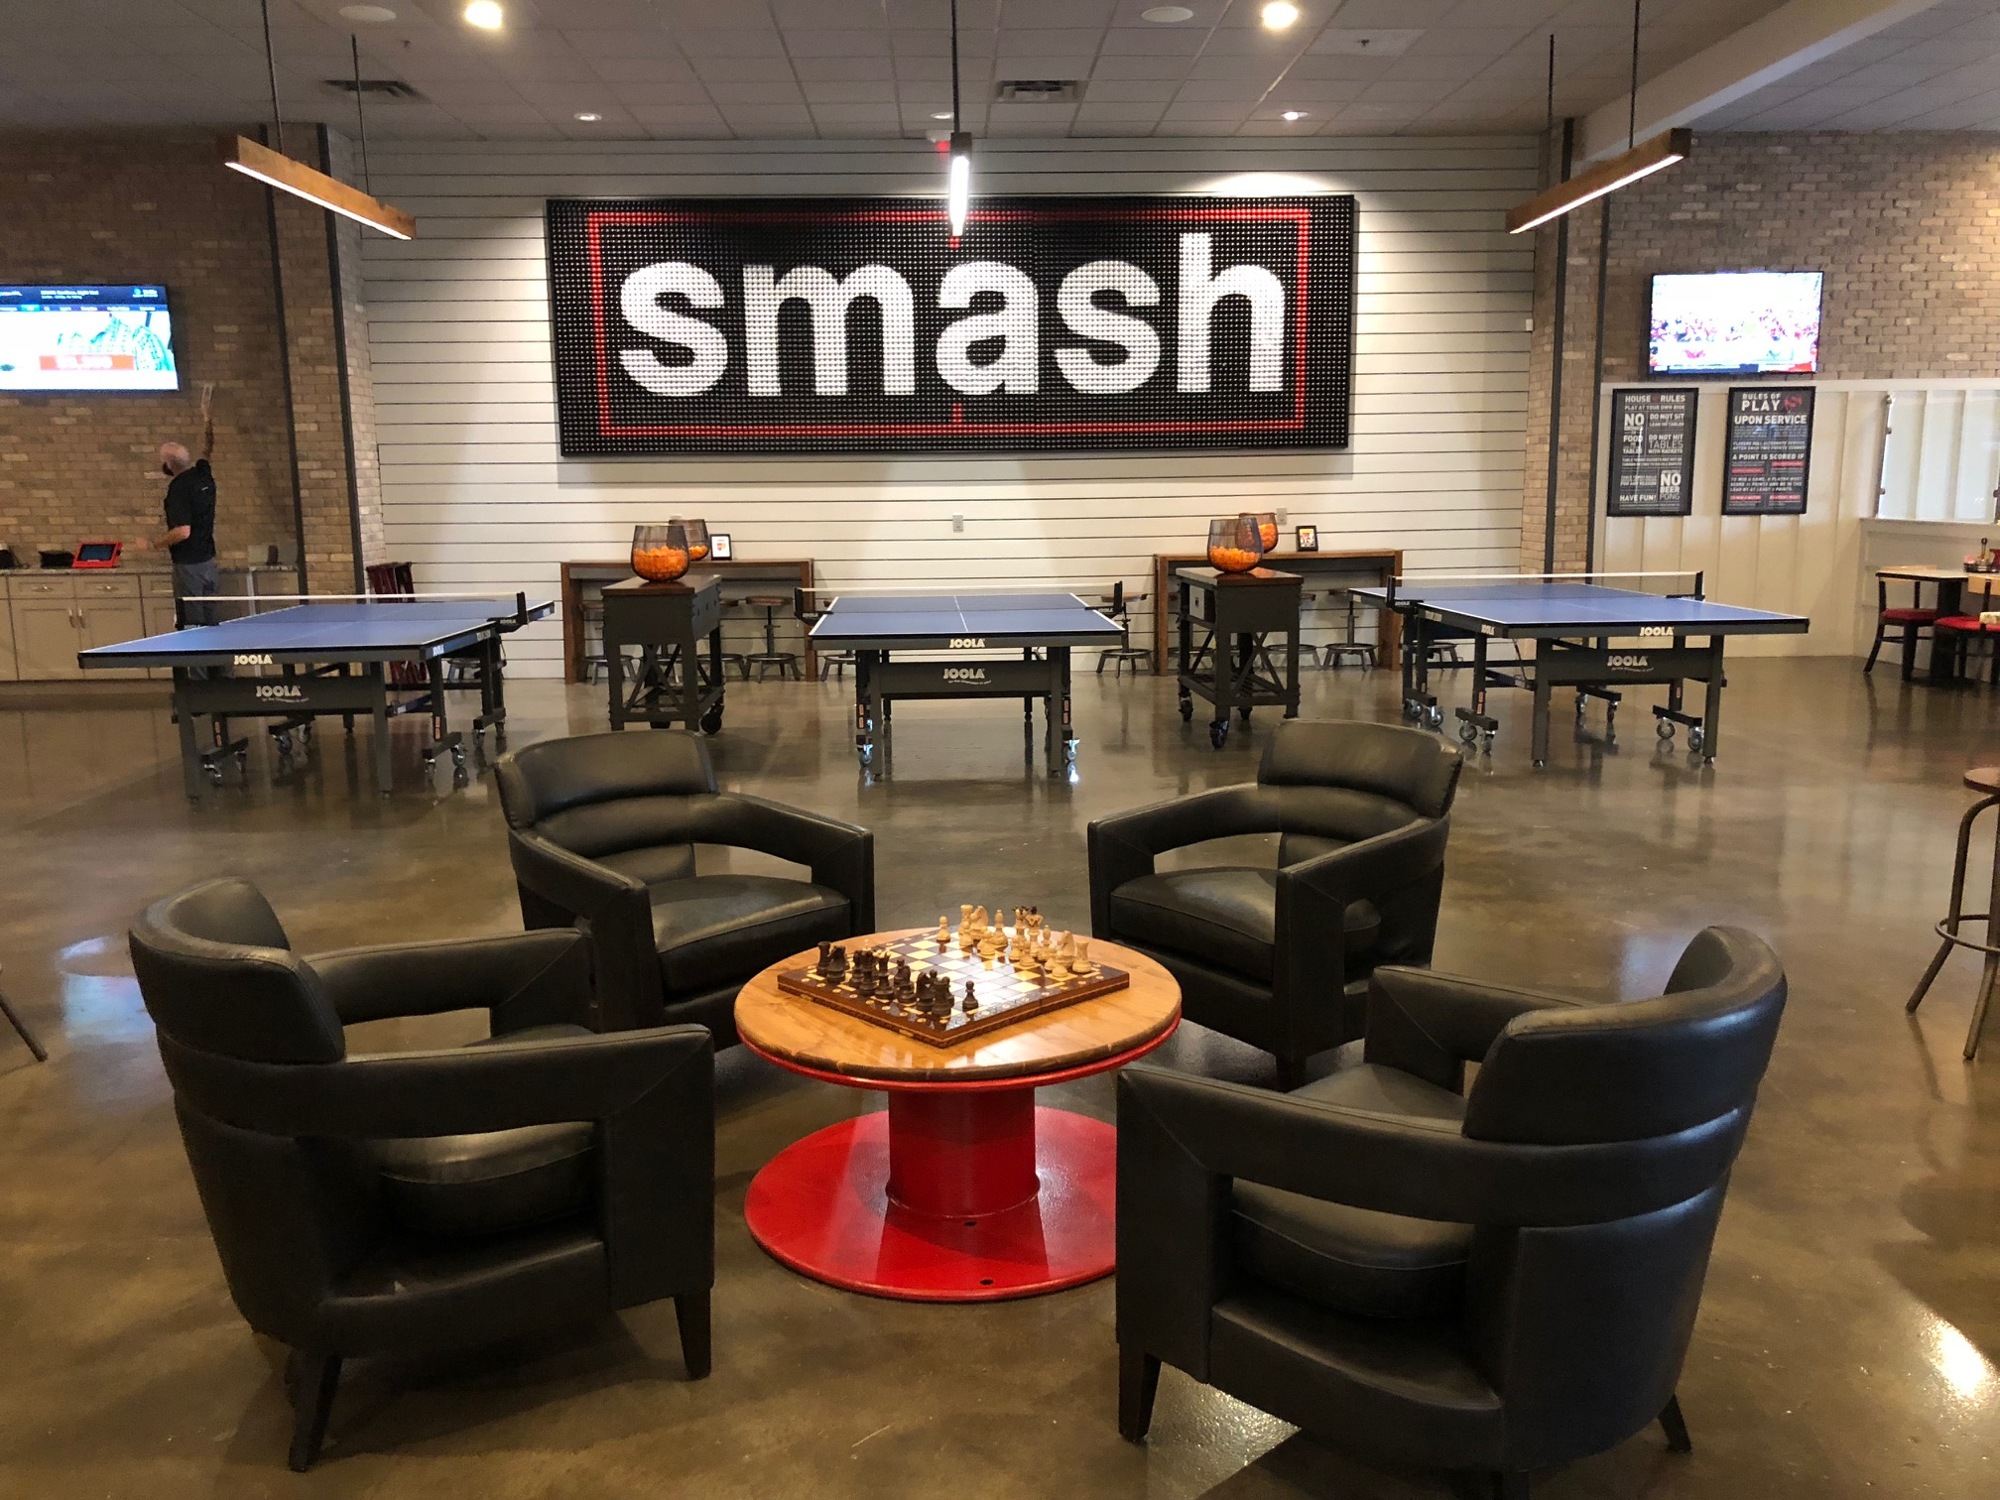 Smash featured 20 pingpong tables, two bars, a kitchen and restaurant seating for 265 people.